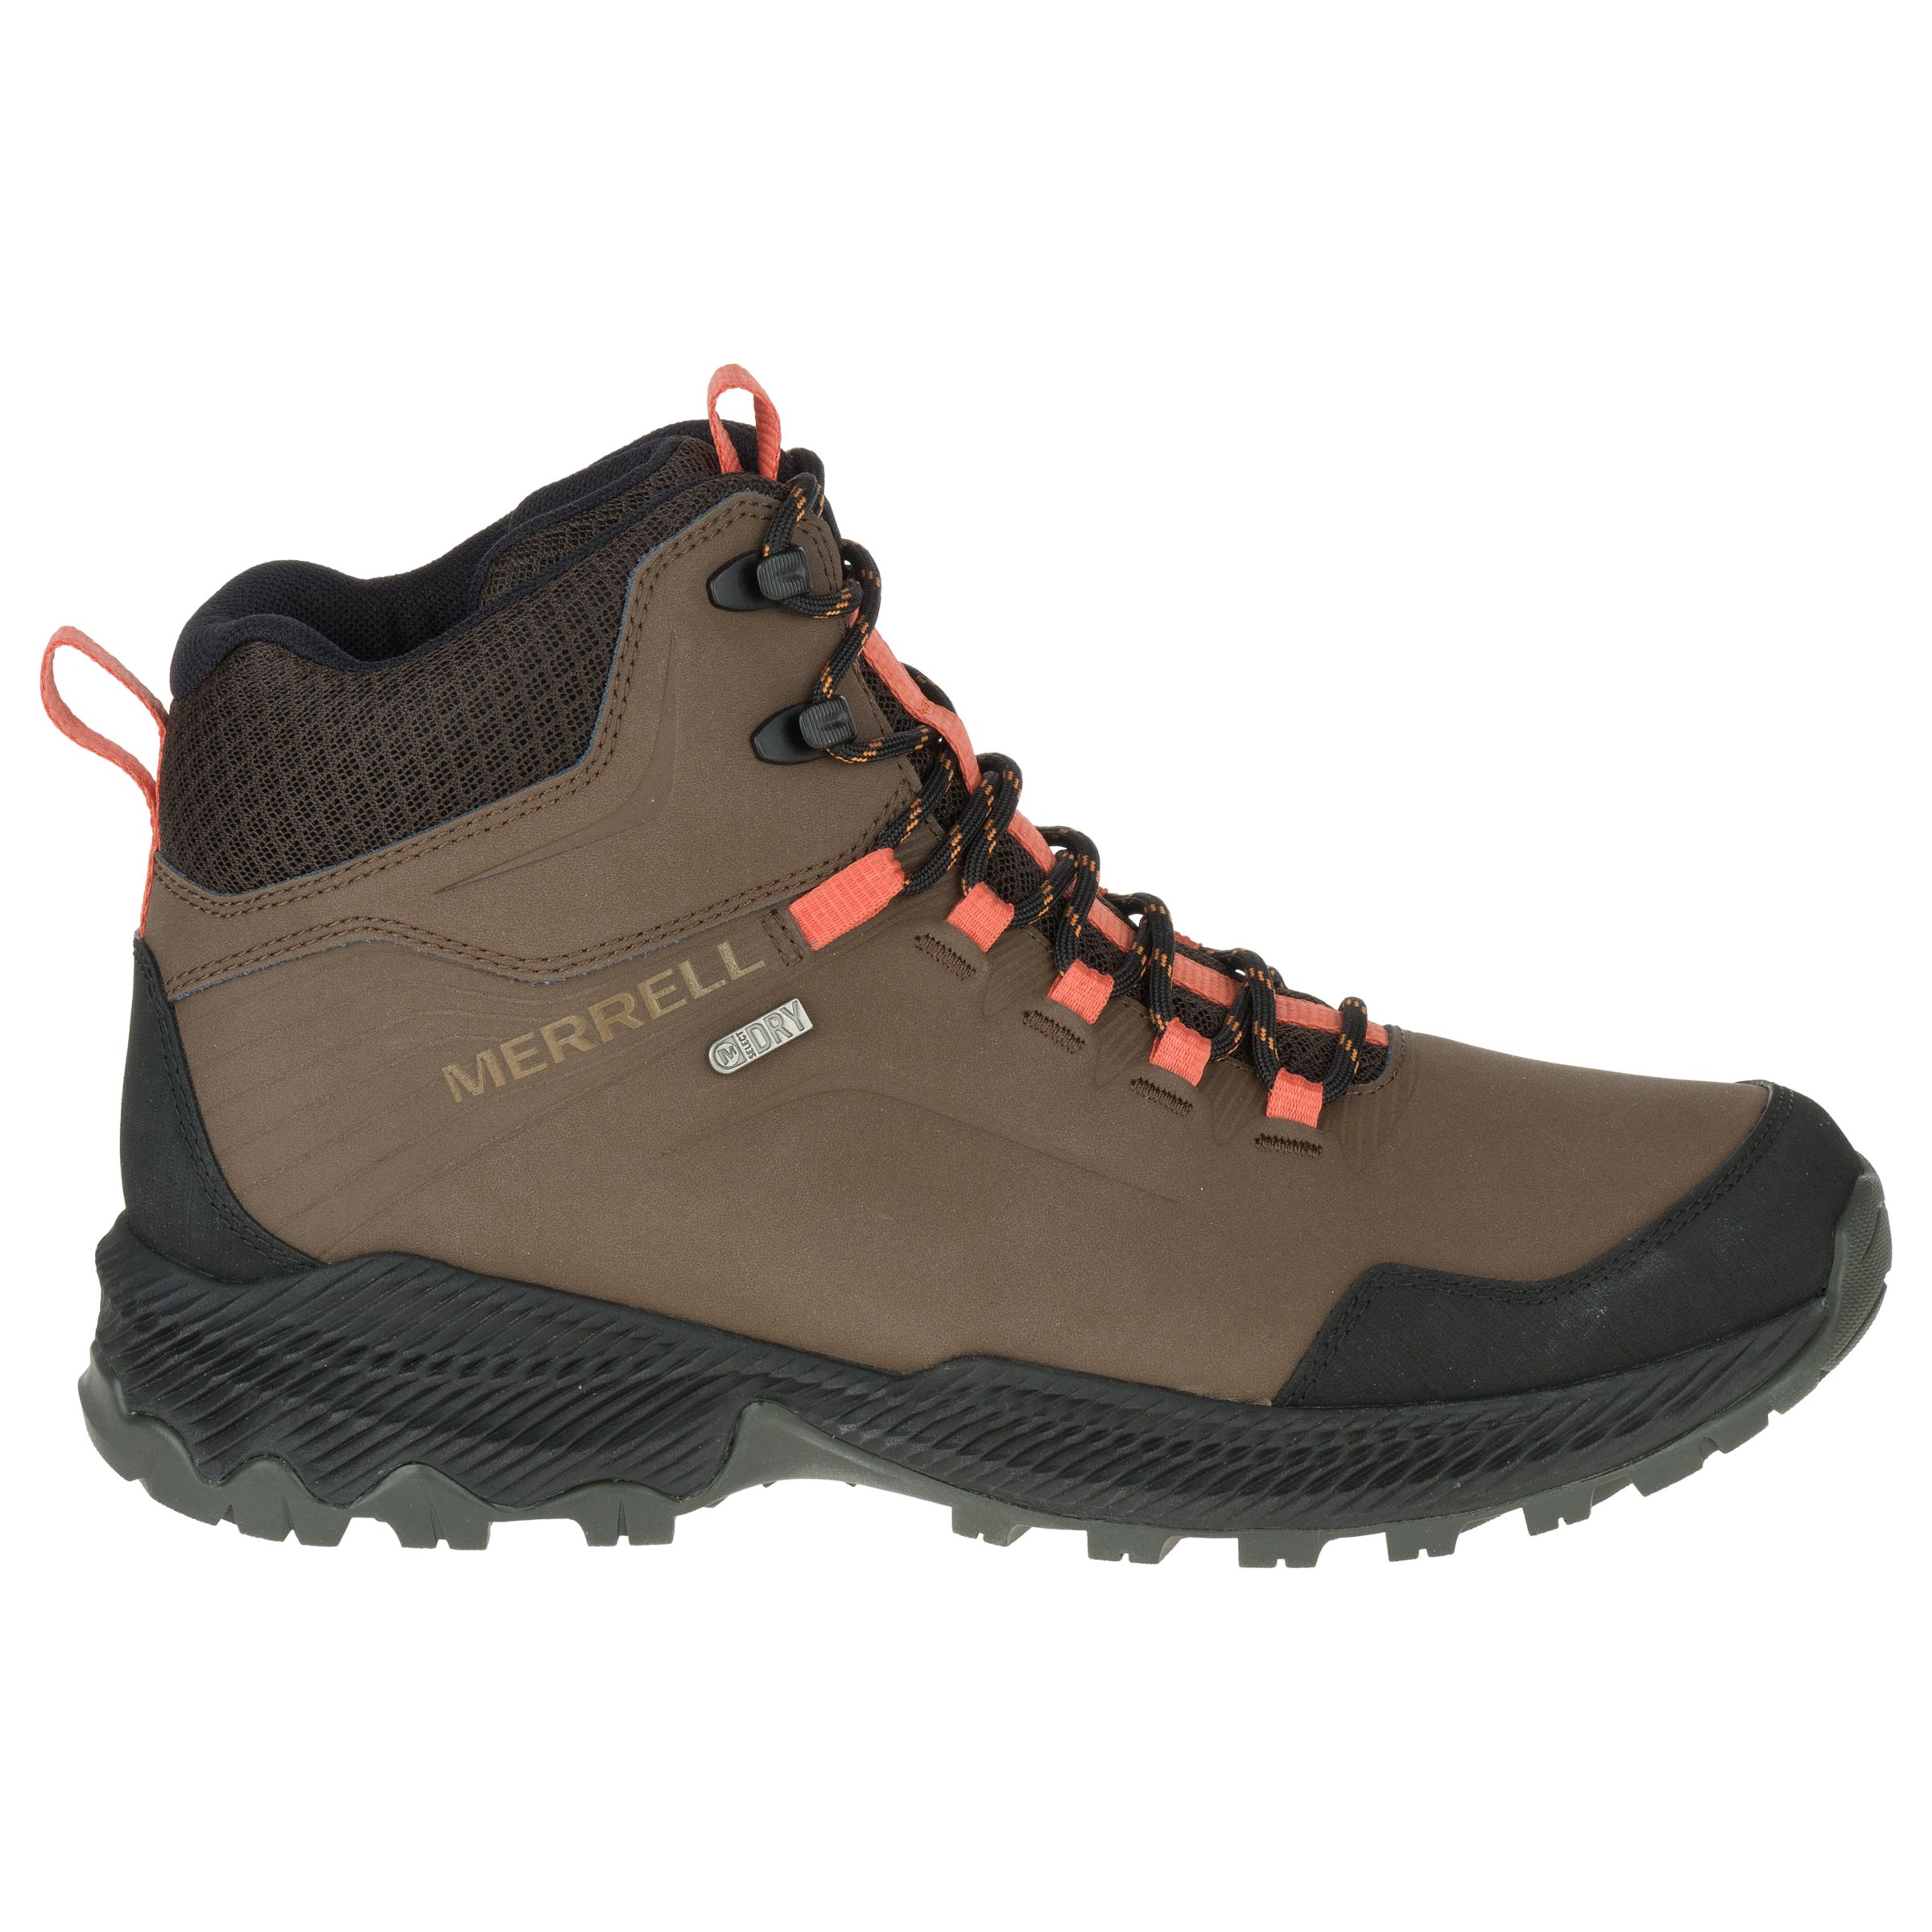 Merrell Forestbound Mid Waterproof Men's Walking Boots, Dark Earth at ...